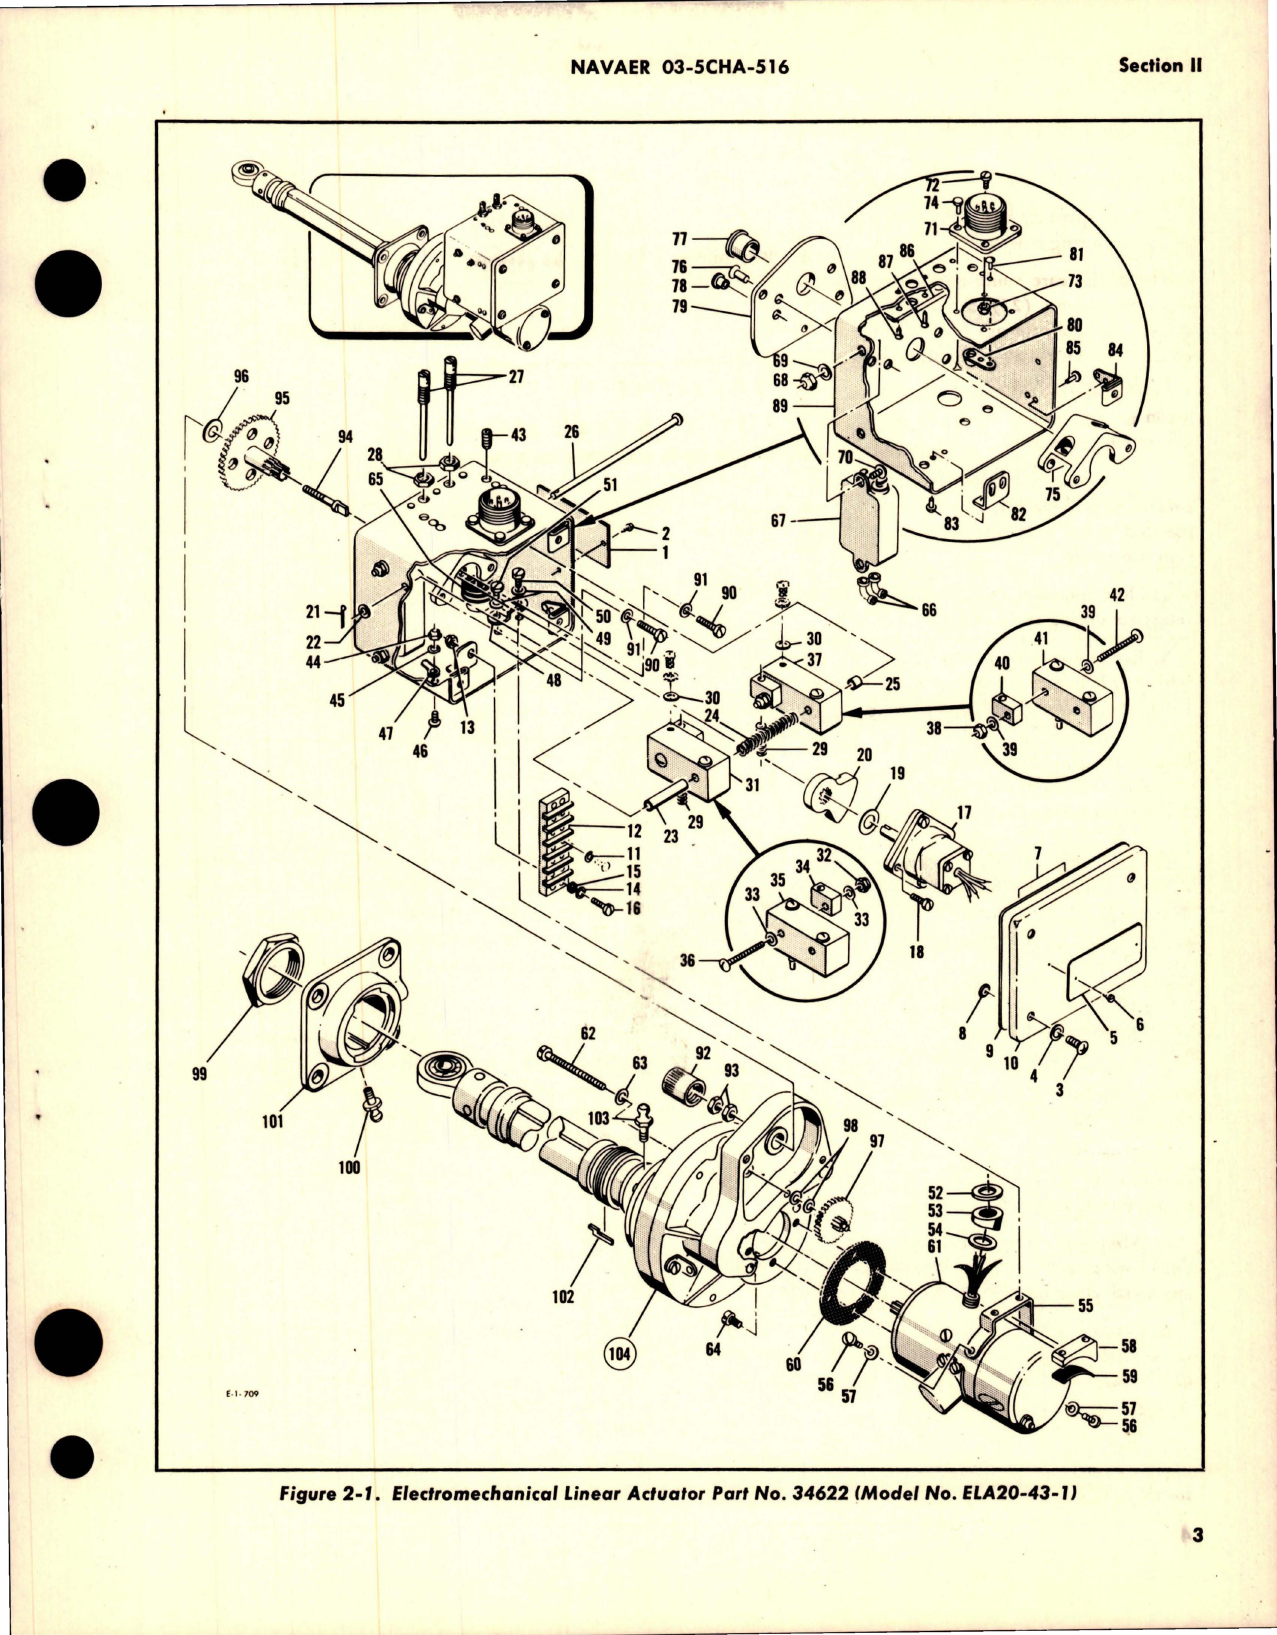 Sample page 7 from AirCorps Library document: Overhaul Instructions for Electromechanical Linear Actuator - Part 34622 - Model ELA20-43 